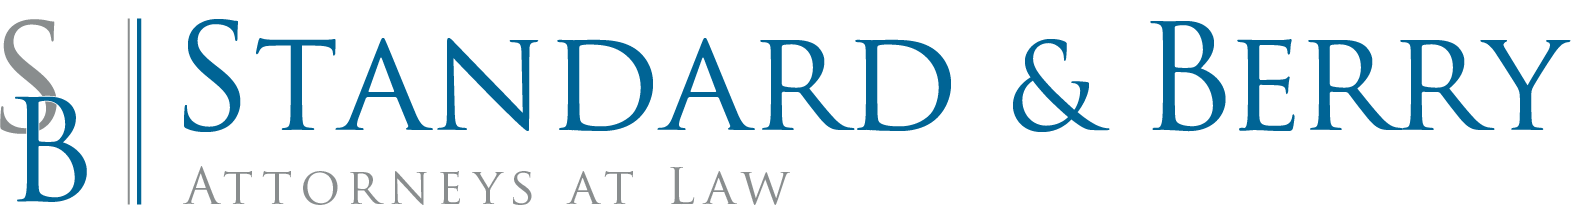 Standard & Berry PLLC | Attorneys at Law